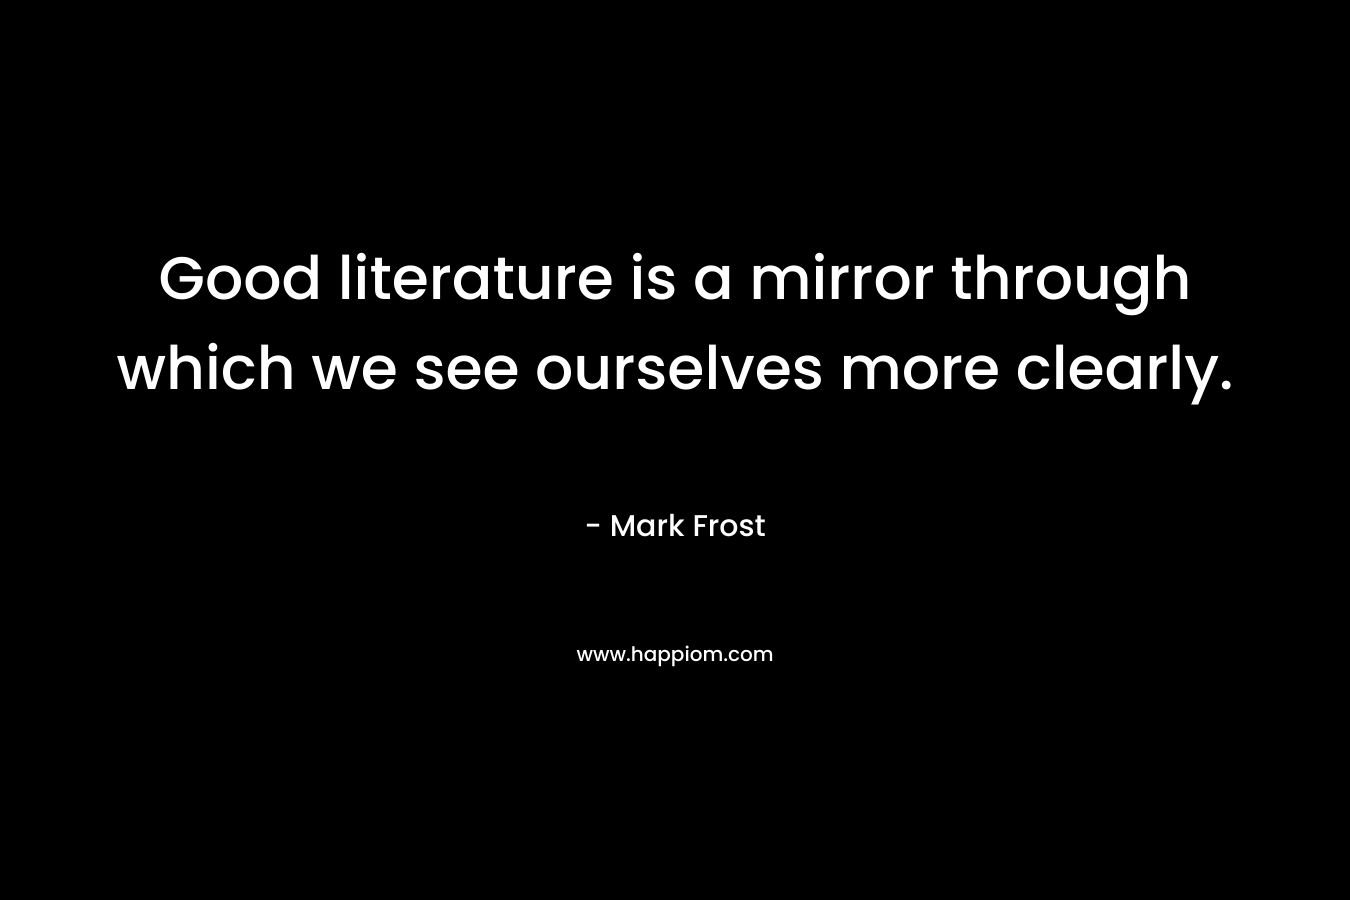 Good literature is a mirror through which we see ourselves more clearly.